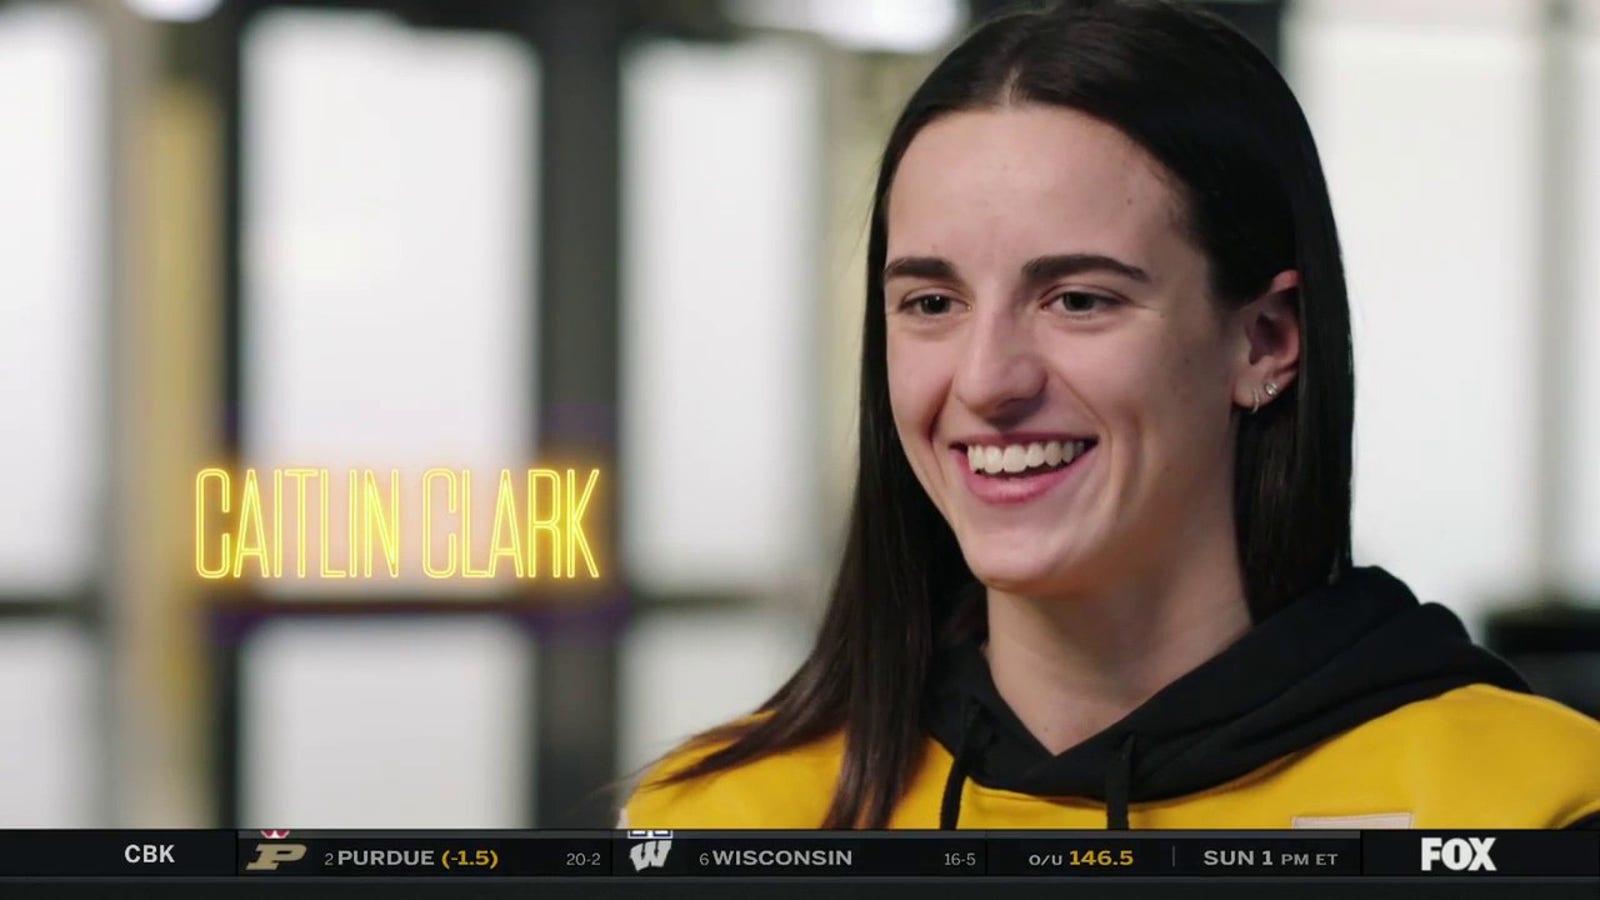 'This is my moment' - Hawkeyes' Caitlin Clark on her in-game mindset as she chases history